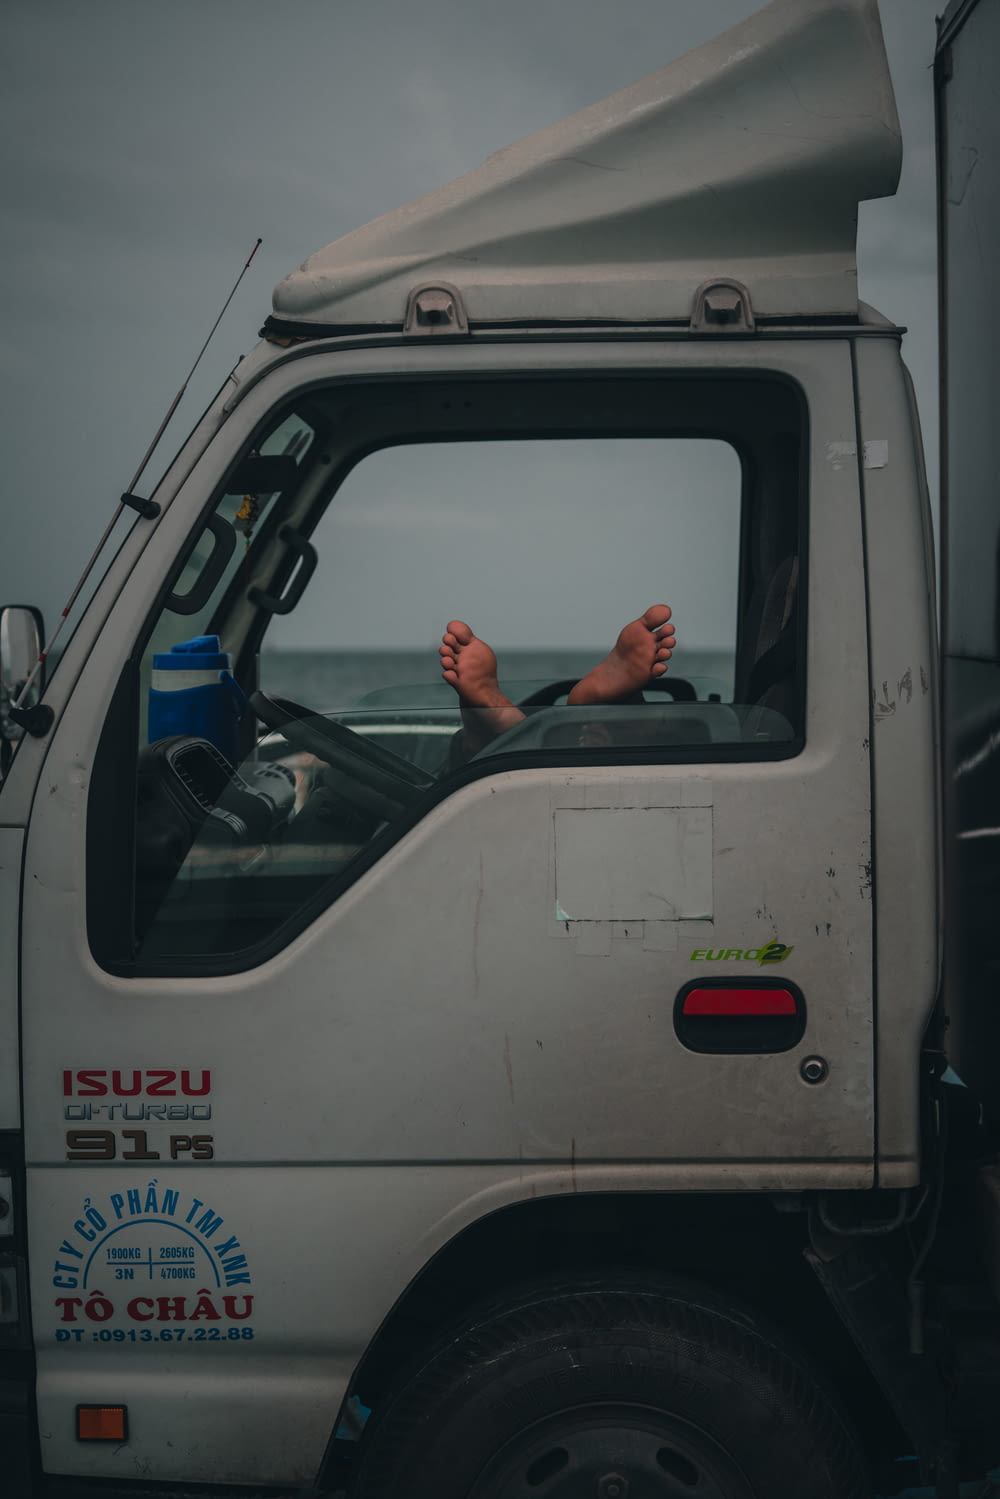 a person waving from a vehicle